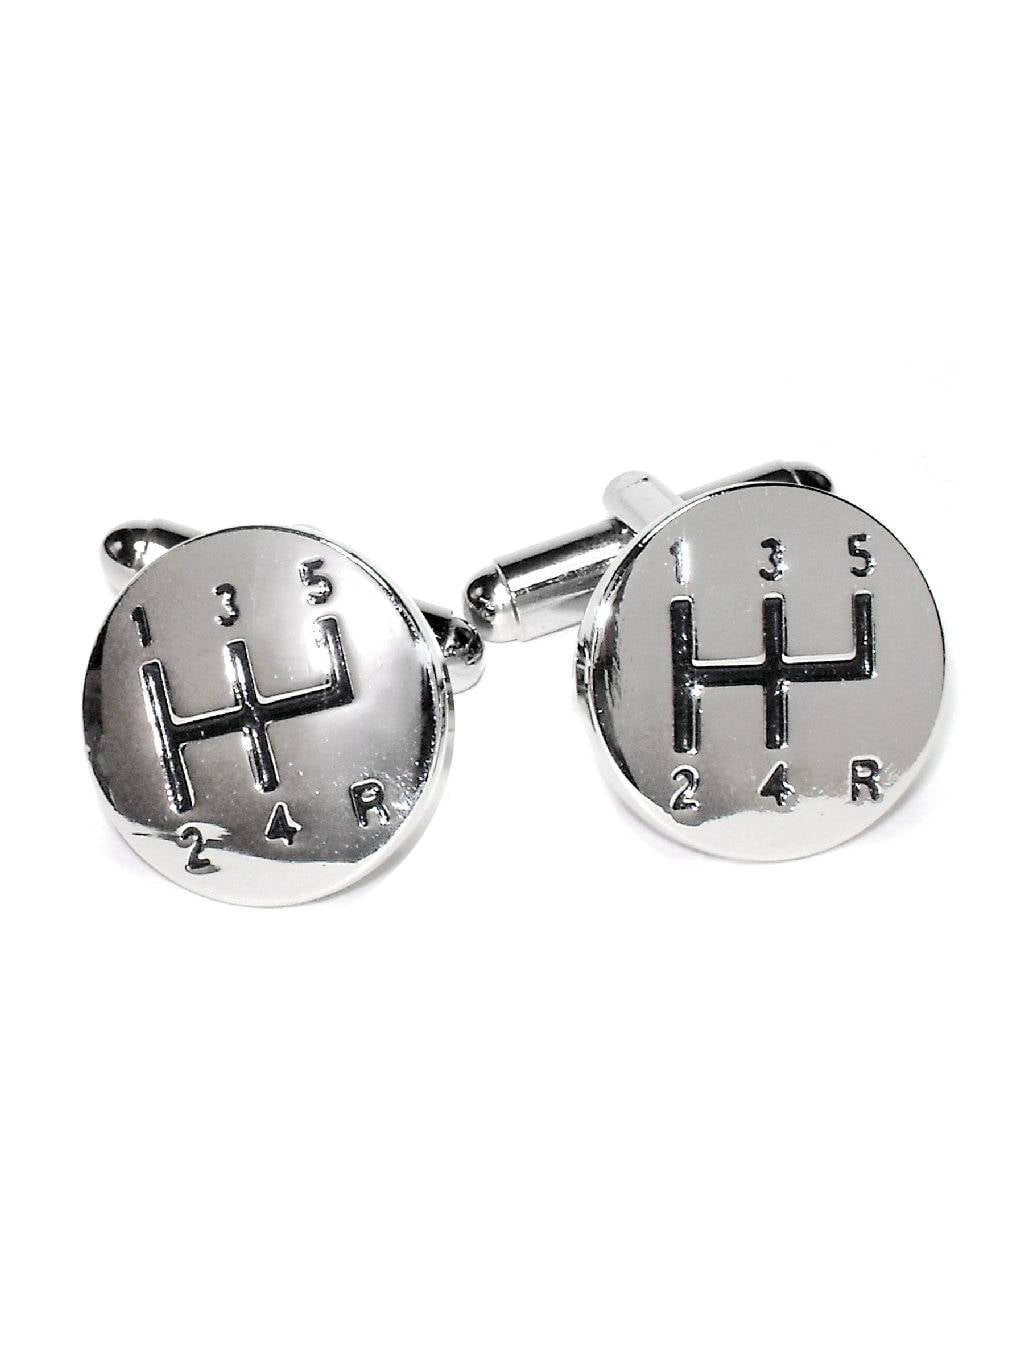 Details about   Star Wars Imperial Logo Fashion Novelty Cuff Links Movie Film Series w/ Gift Box 